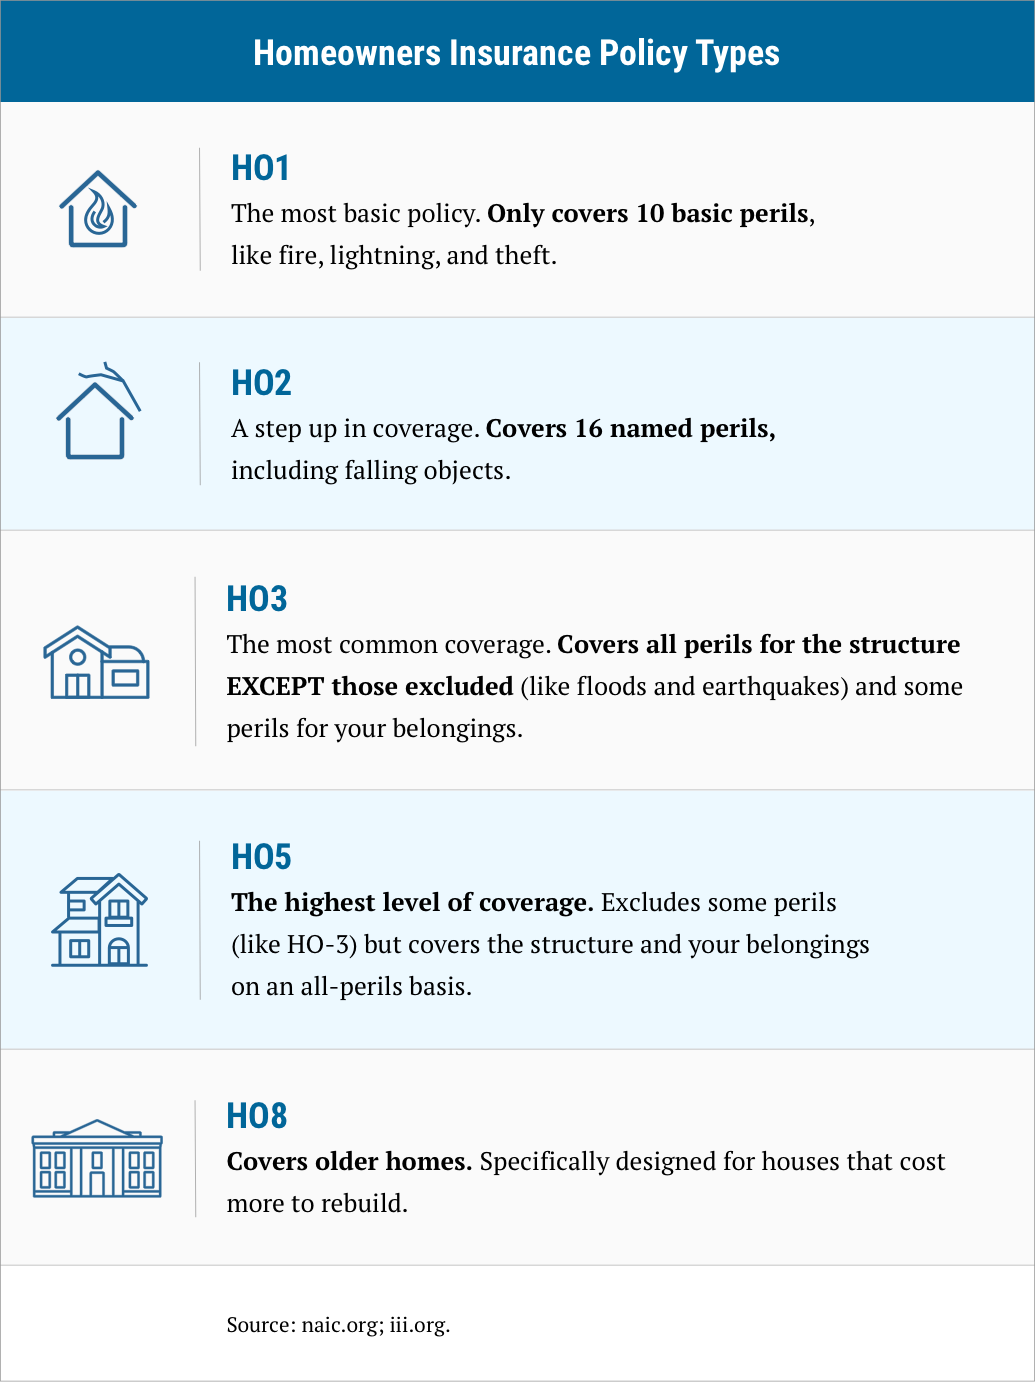 infographics on homeowners insurance policy types